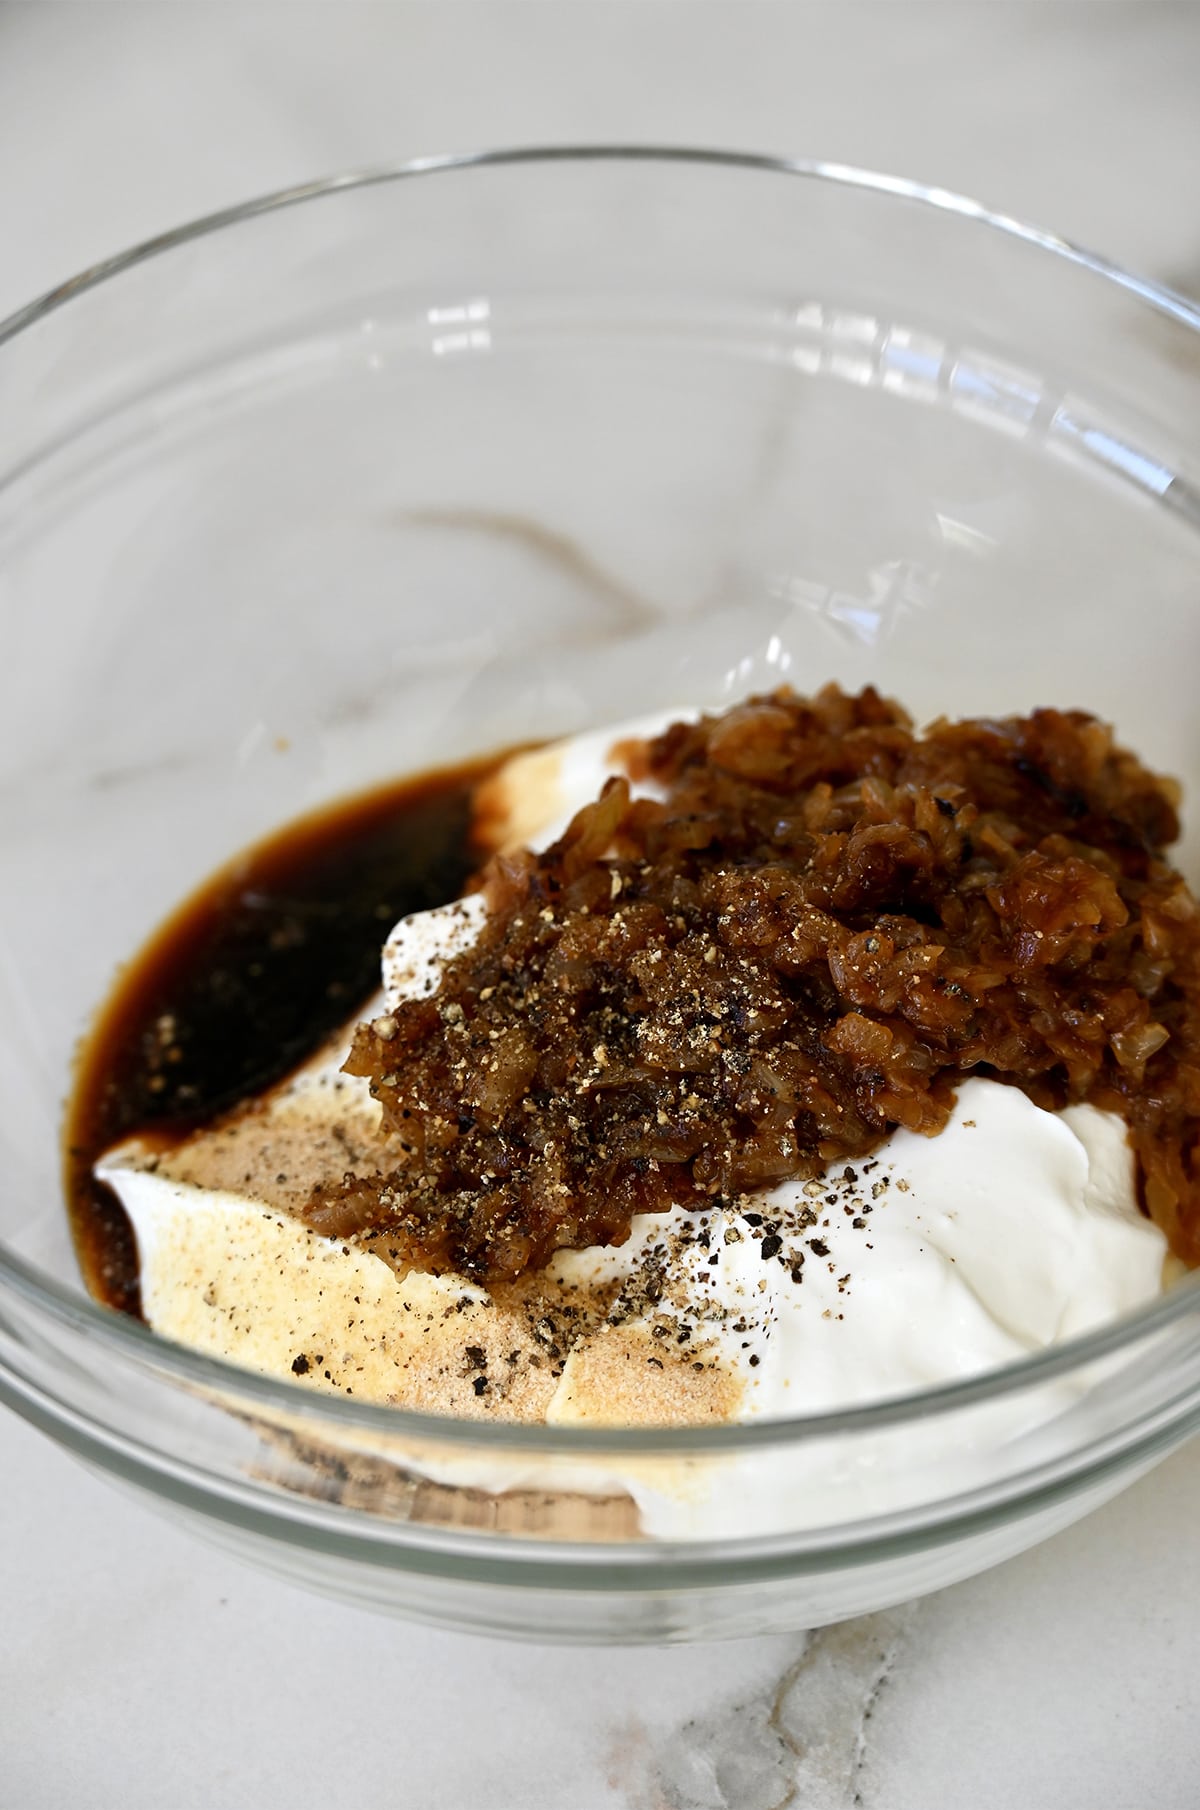 A glass bowl containing sour cream, soy sauce, caramelized onions, garlic powder and black pepper.